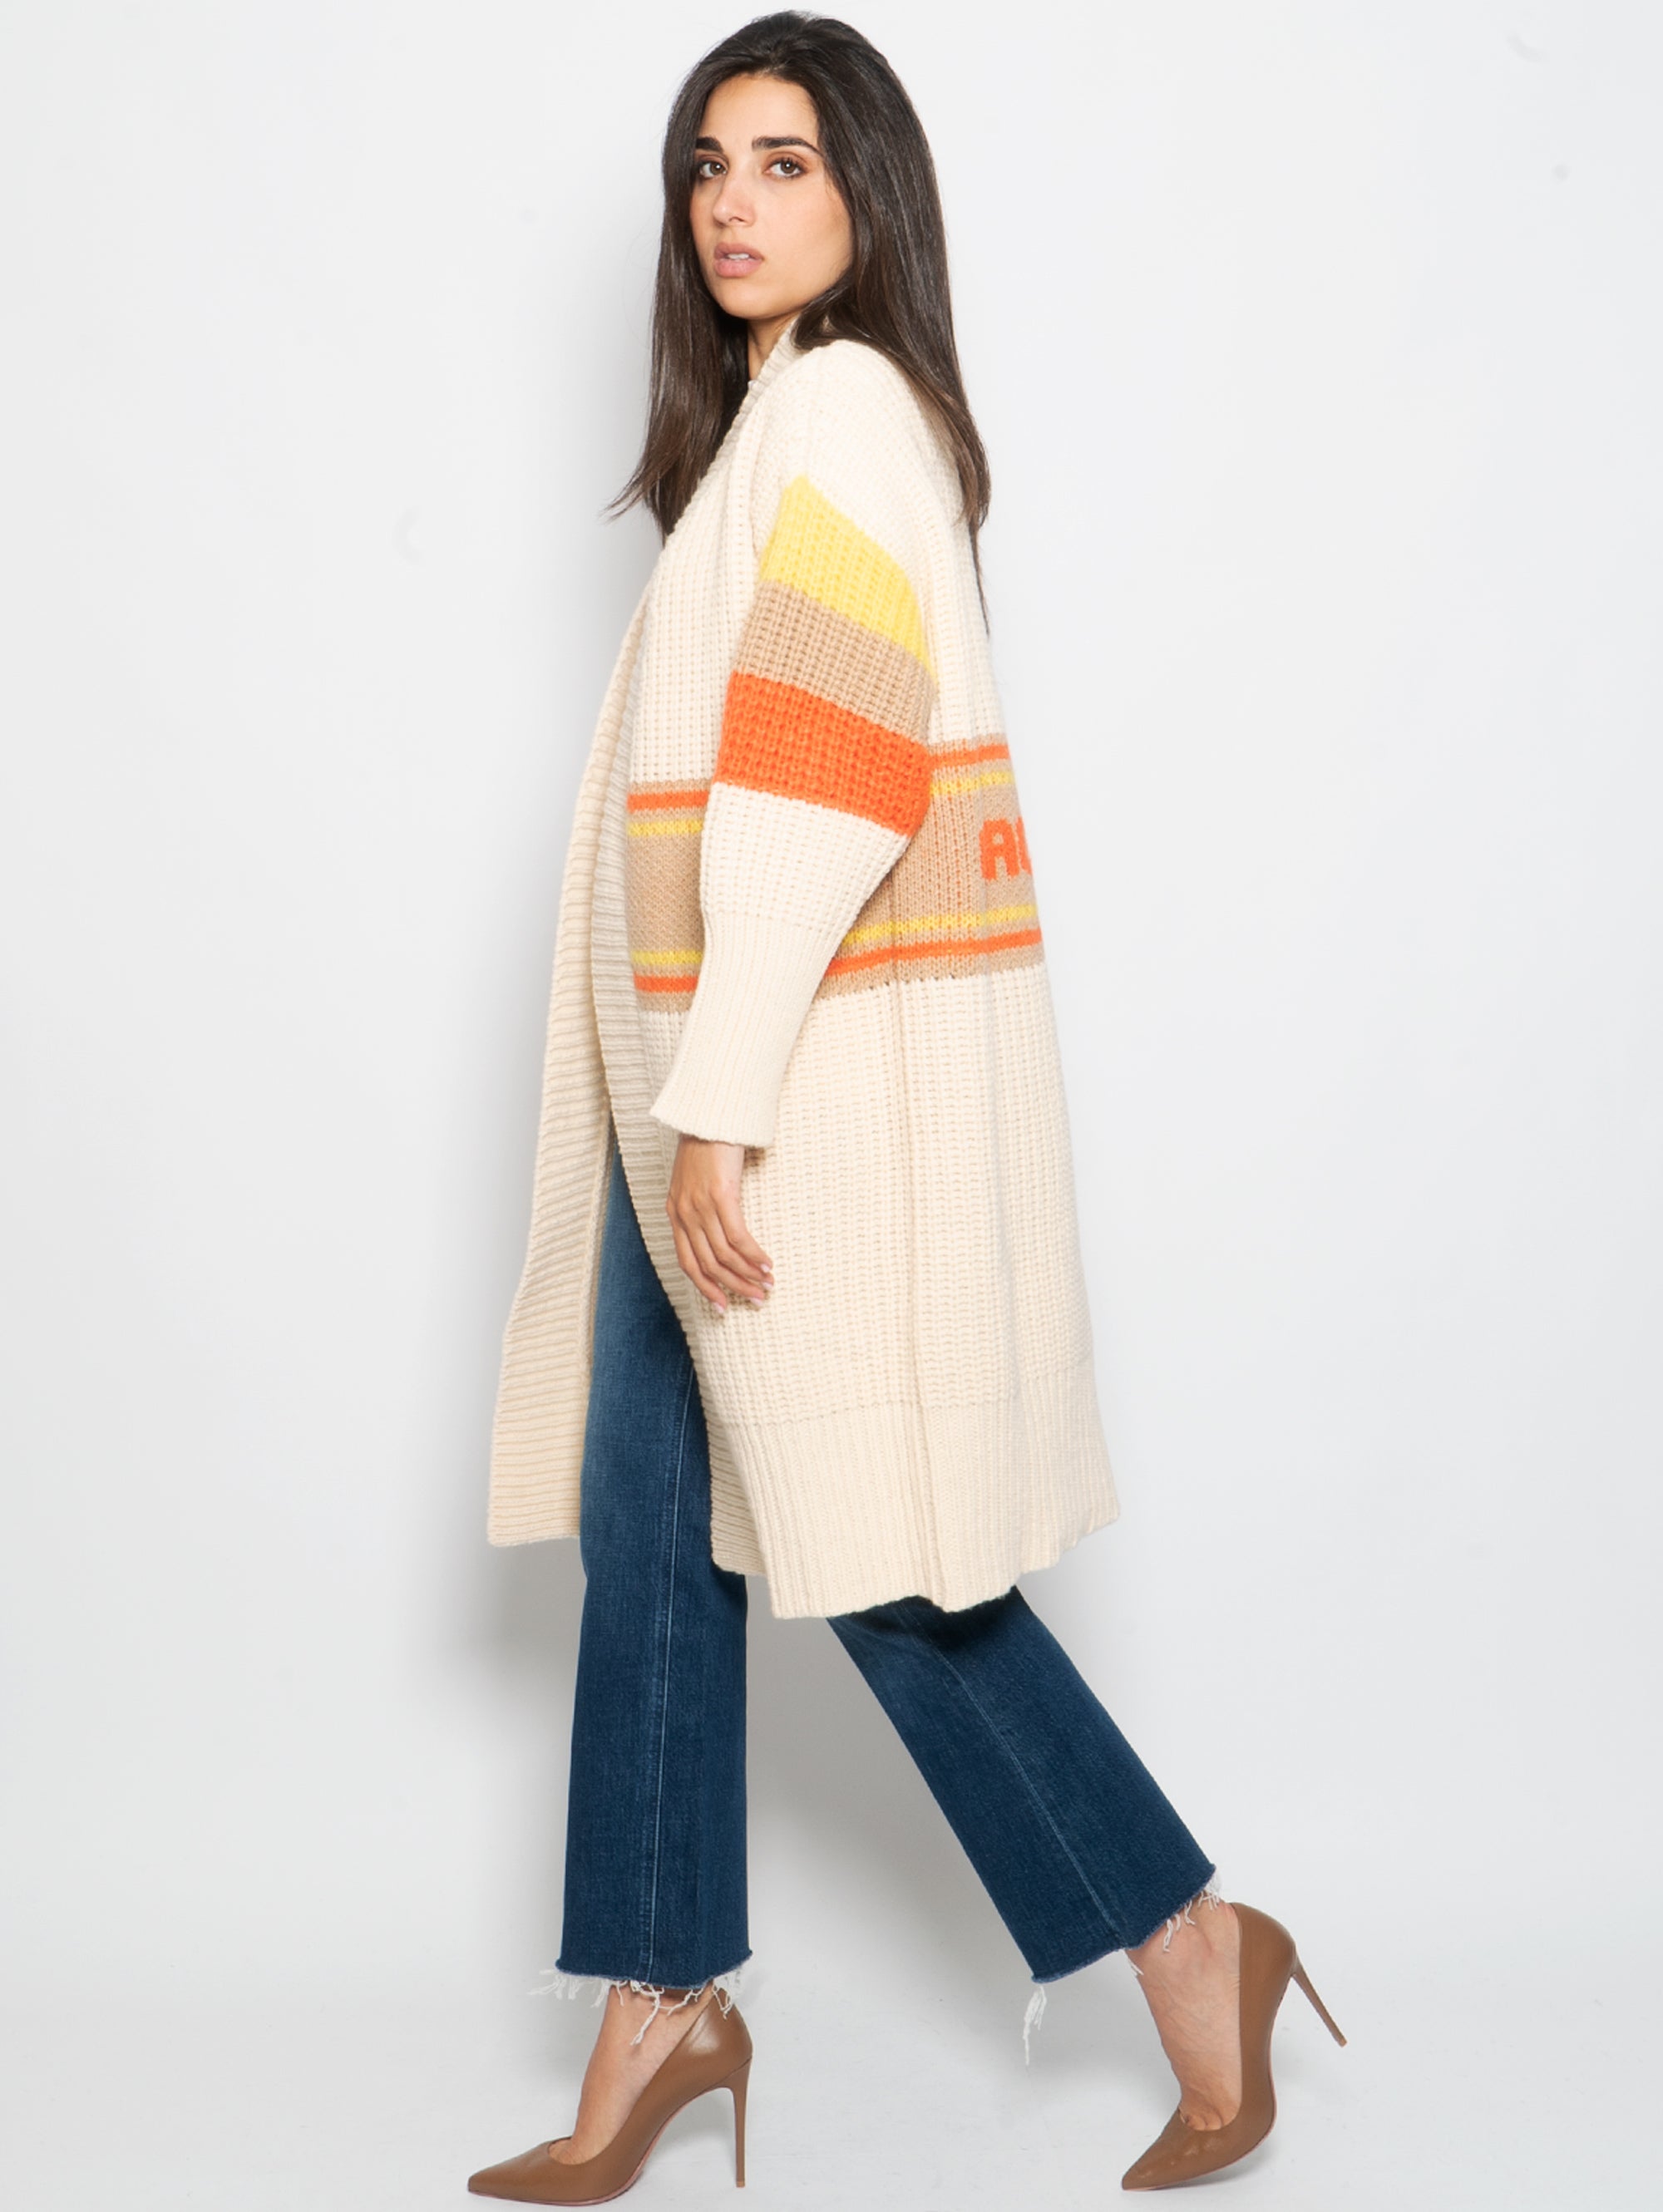 Maxi Cardigan in Ciao Amore White Knit